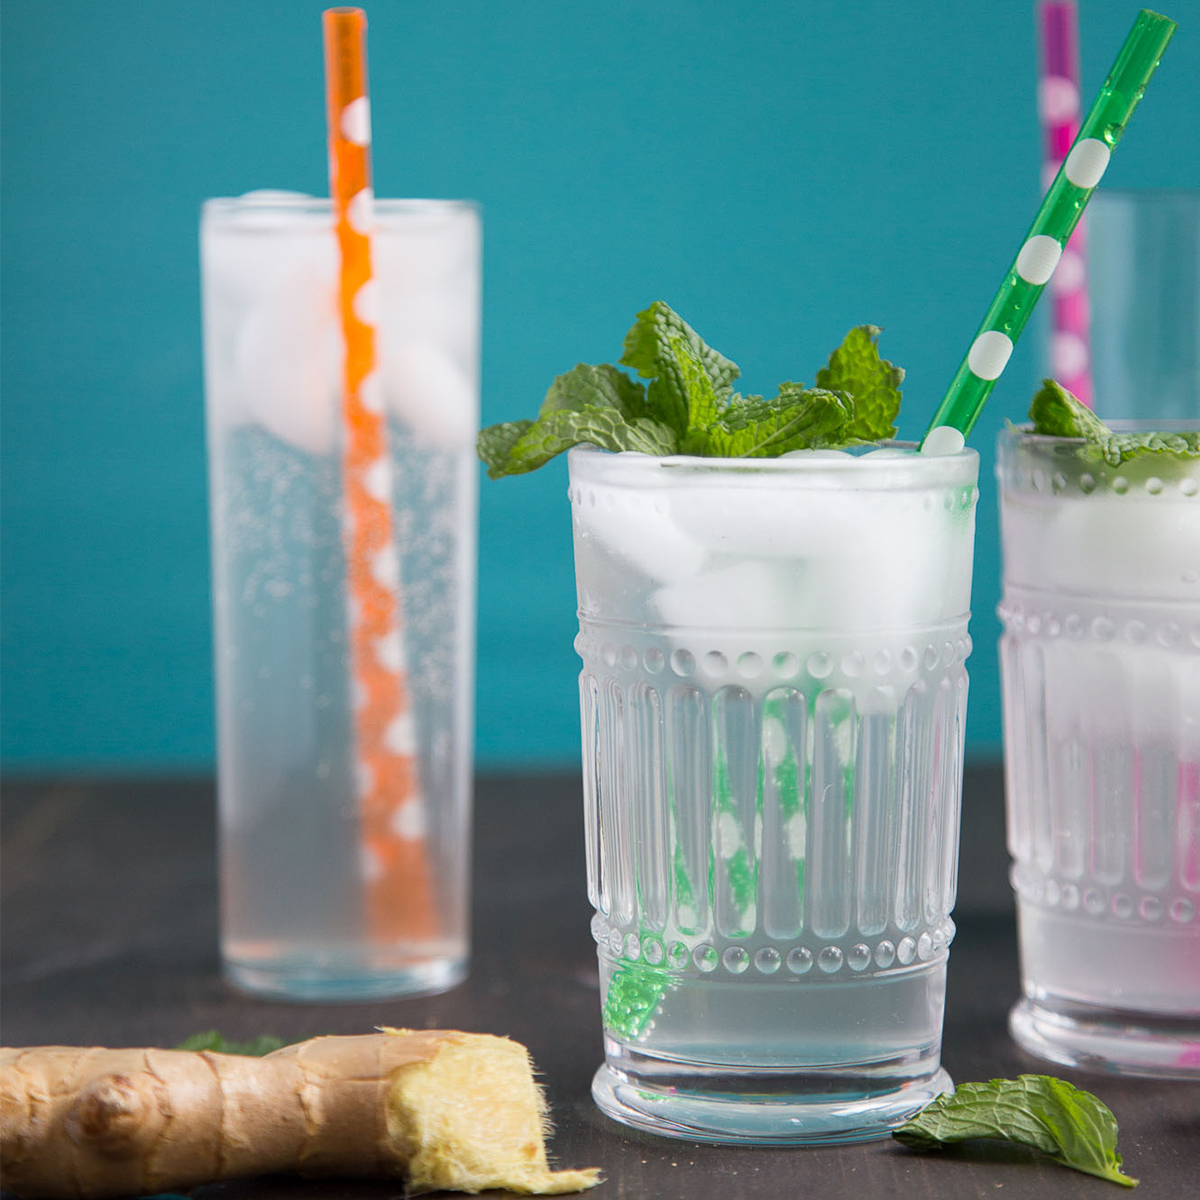 tall glasses of ginger ale with colorful straws